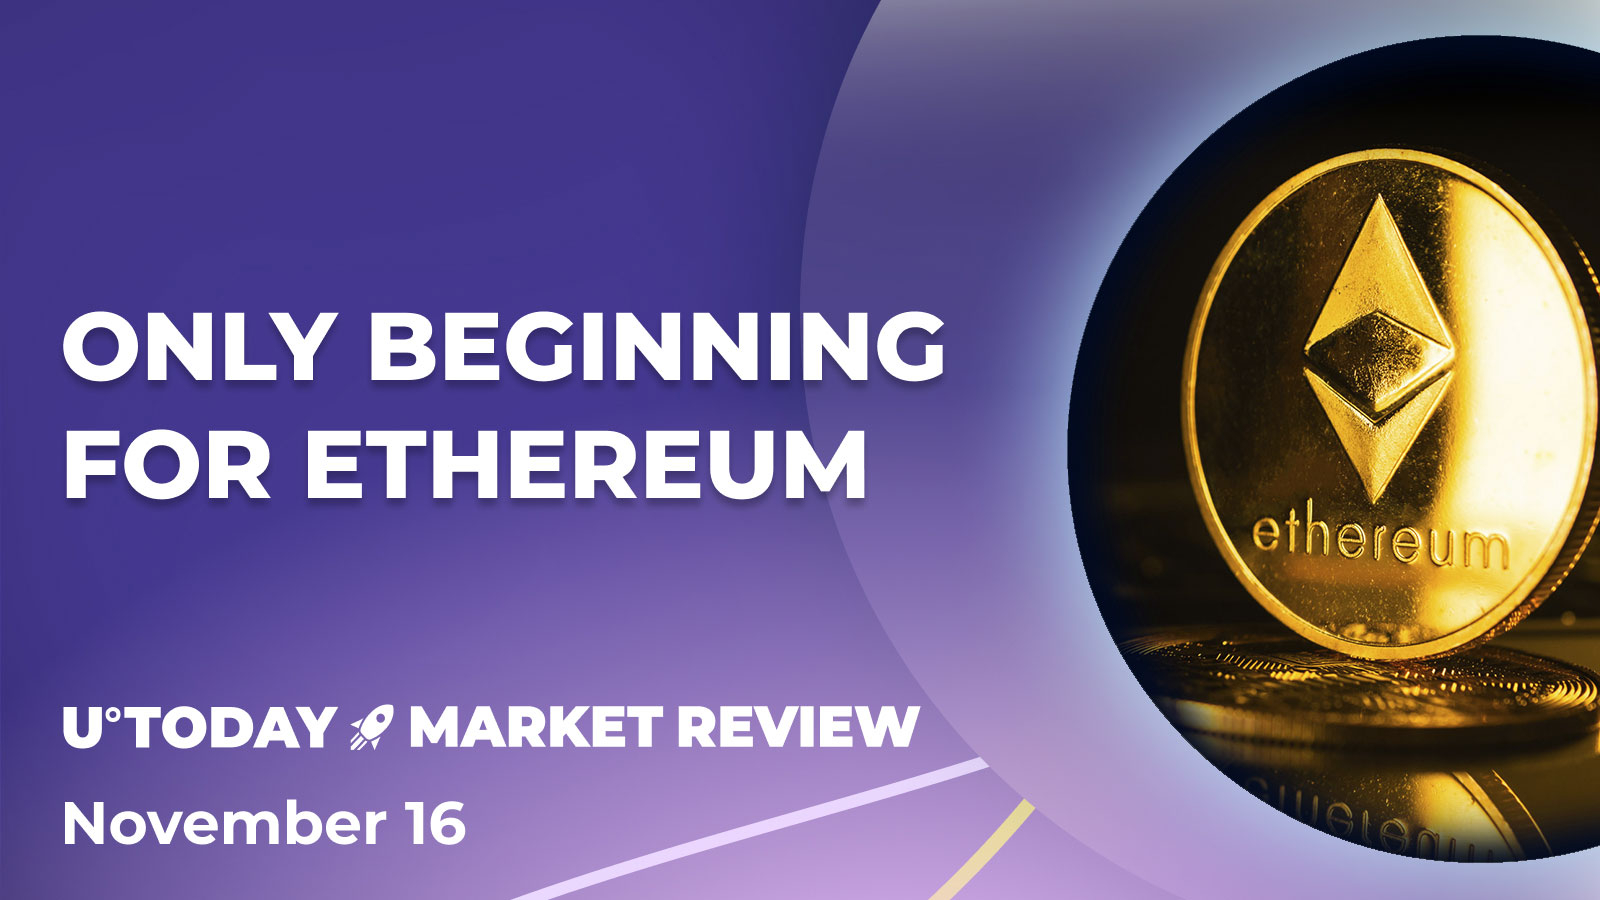 Ethereum's (ETH) Rally: Prelude to Further Gains as Price Exceeds $2,000 Again